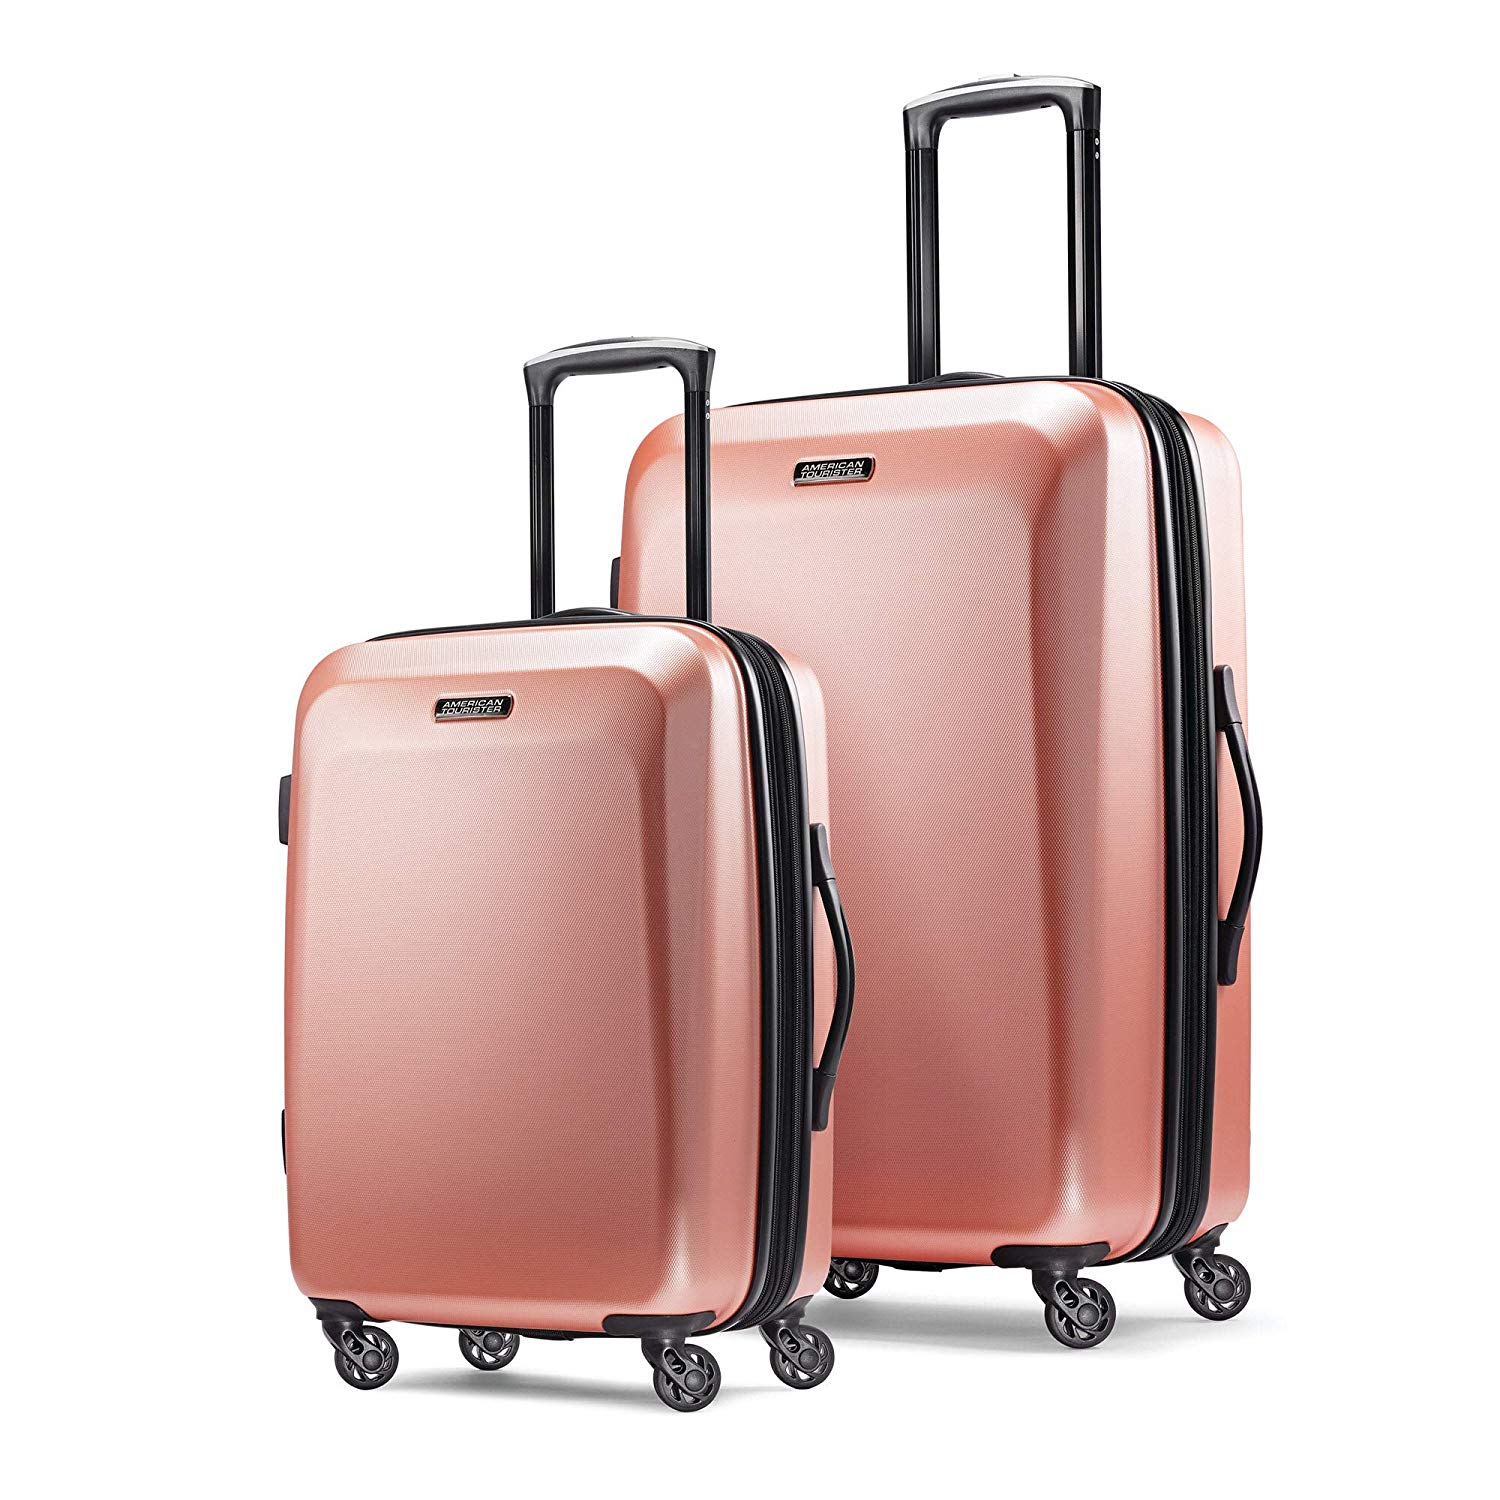 American Tourister Moonlight Hardside Luggage with Spinner Wheels